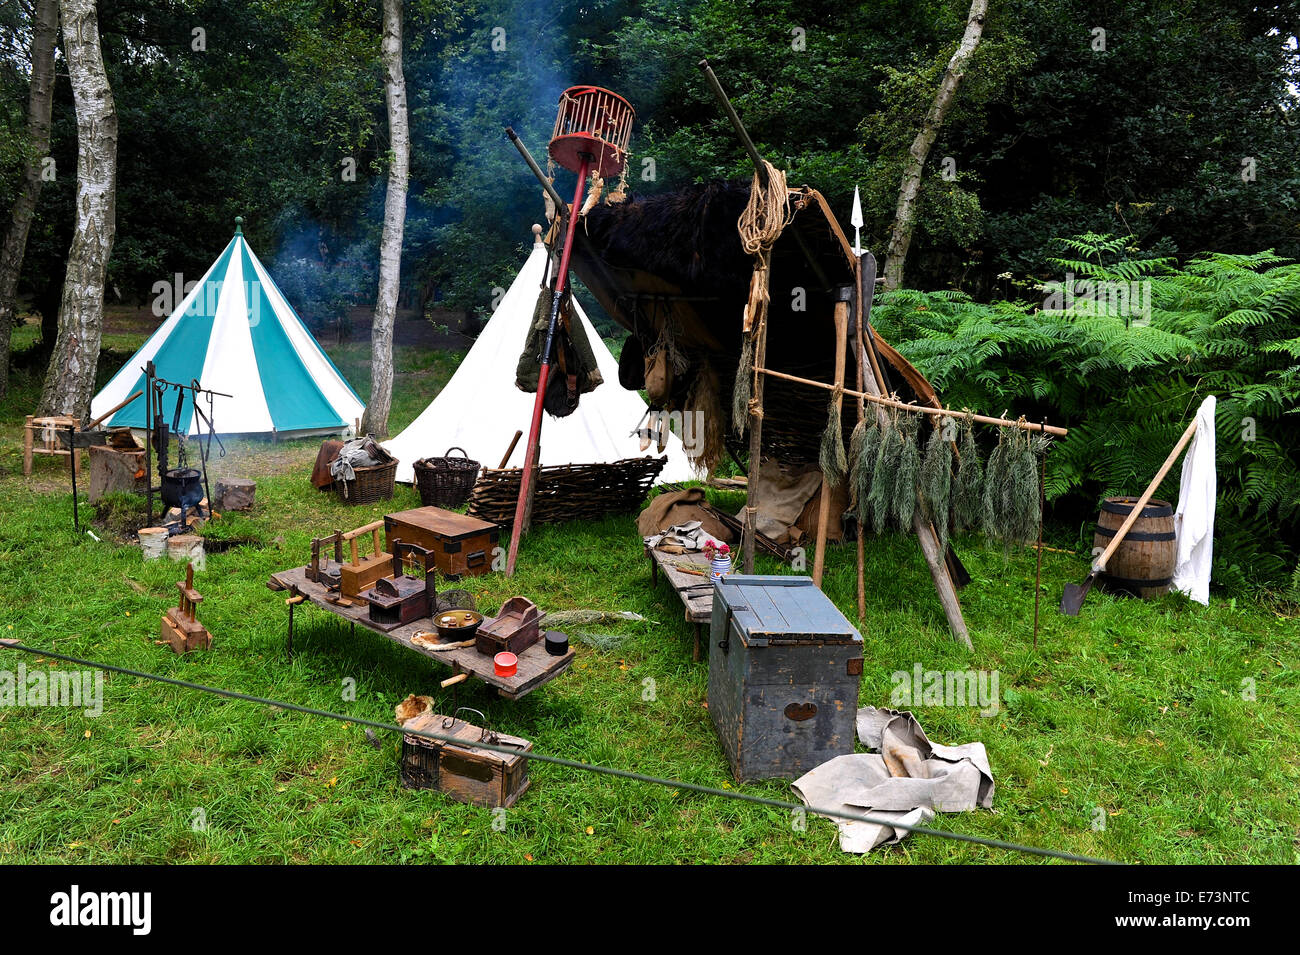 A display of an ancient lifestyle in Sherwood Forrest, Stock Photo